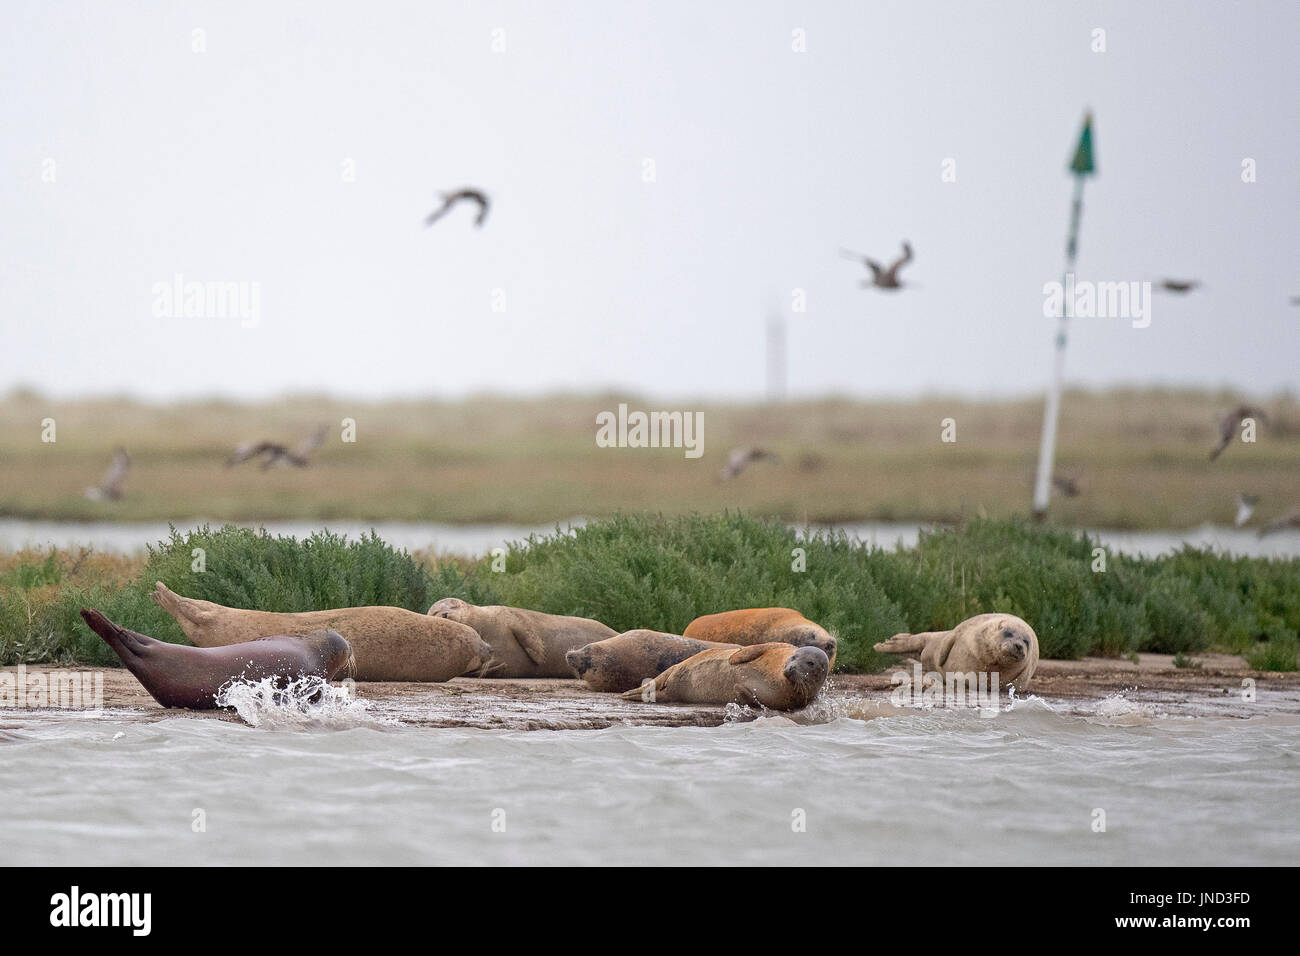 Seals line the banks of the River Stour in Pegwell Bay, Kent, as marine biologists from ZSL (Zoological Society of London) undertake the fifth annual seal survey in the Thames Estuary. Stock Photo